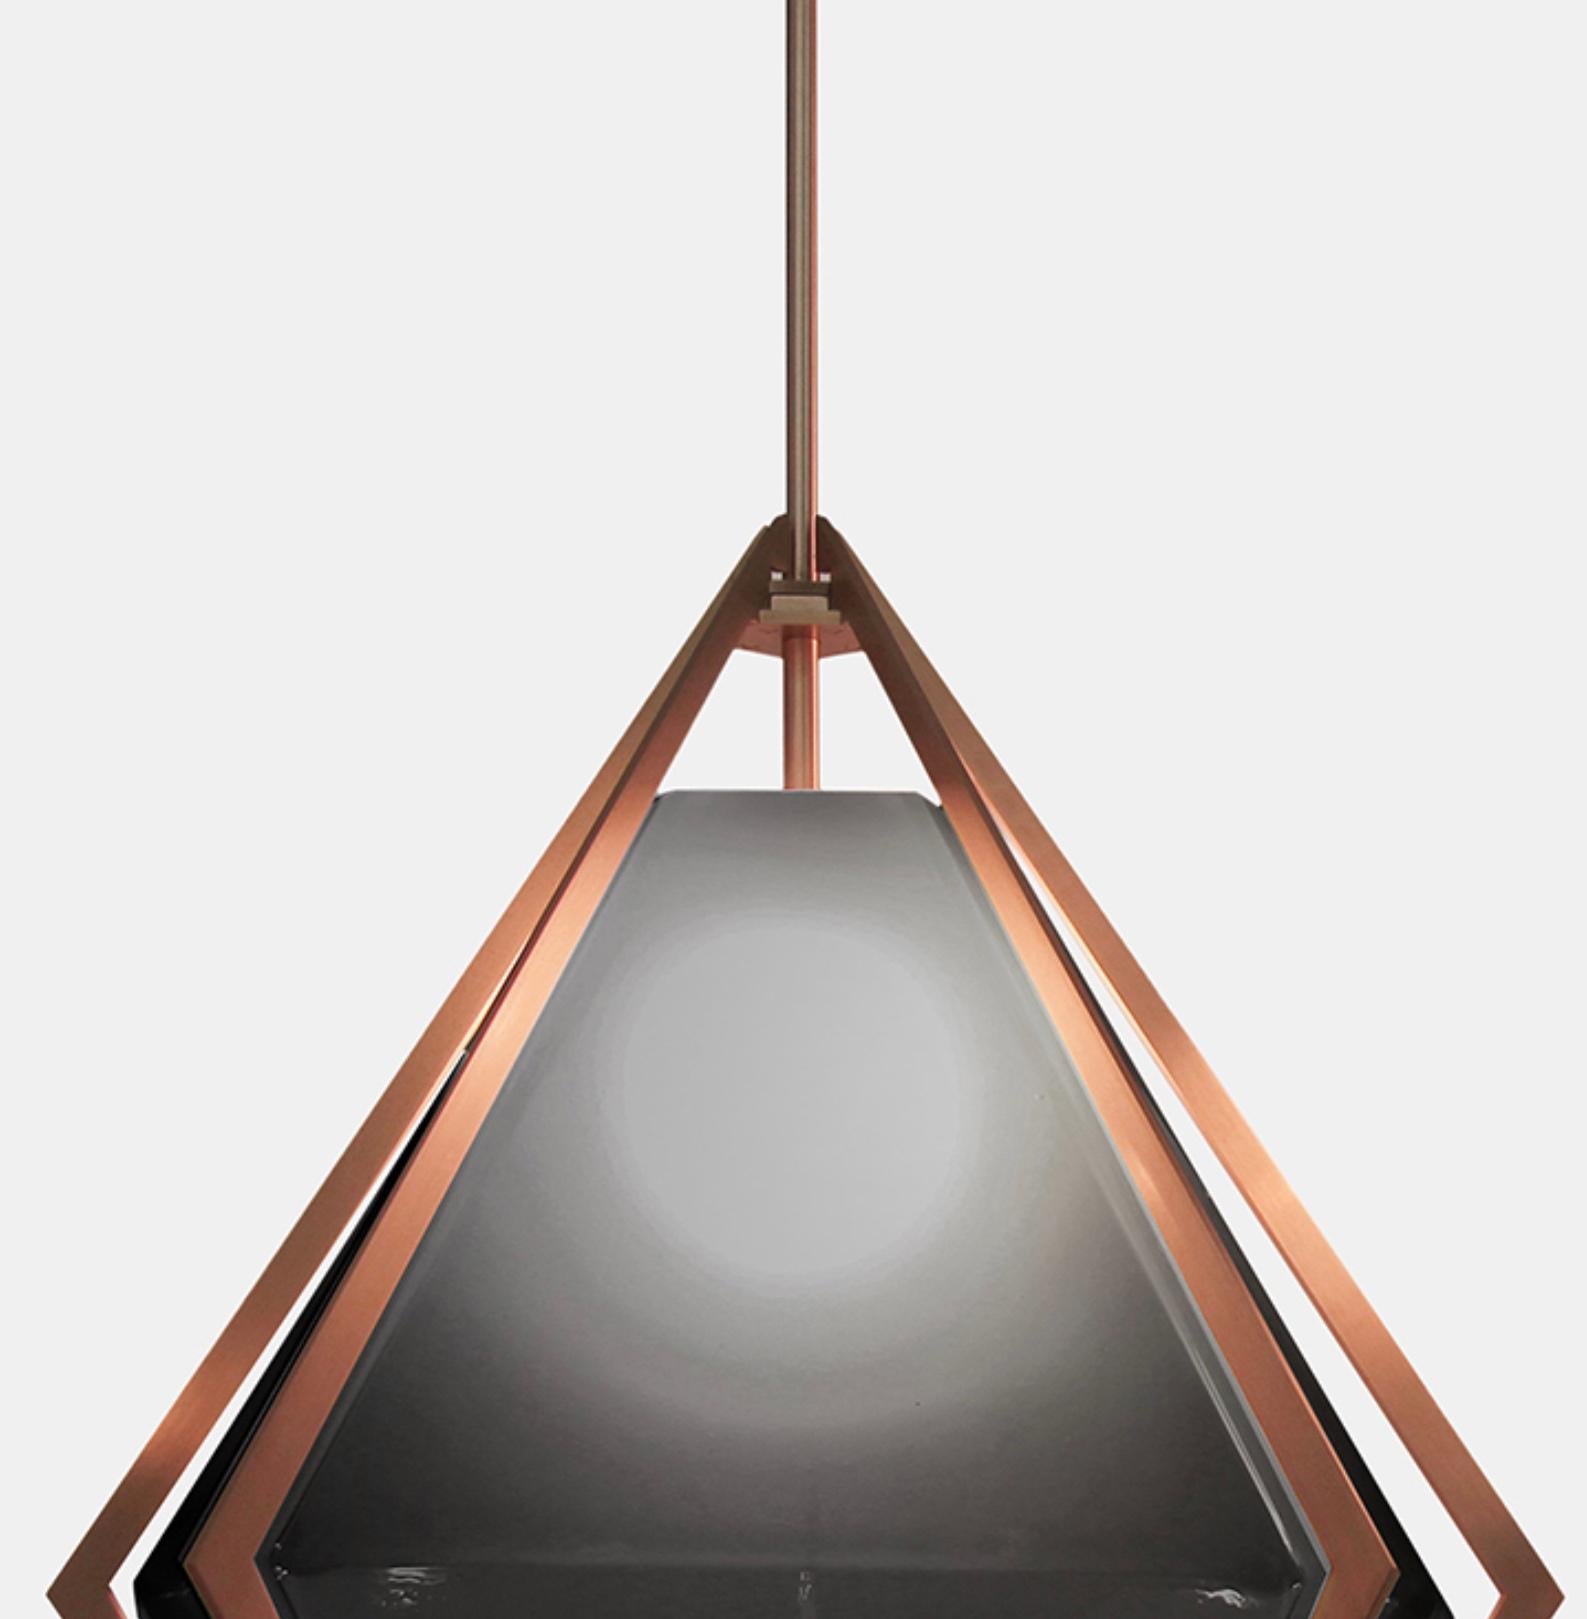 The Harlow Large Pendant offers an elegant starburst of light that reflects and refracts through its mold-blown glass shade. A sparkling prism, the Harlow Large Pendant is directly inspired by the world of jewelry with its metallic frame encasing a